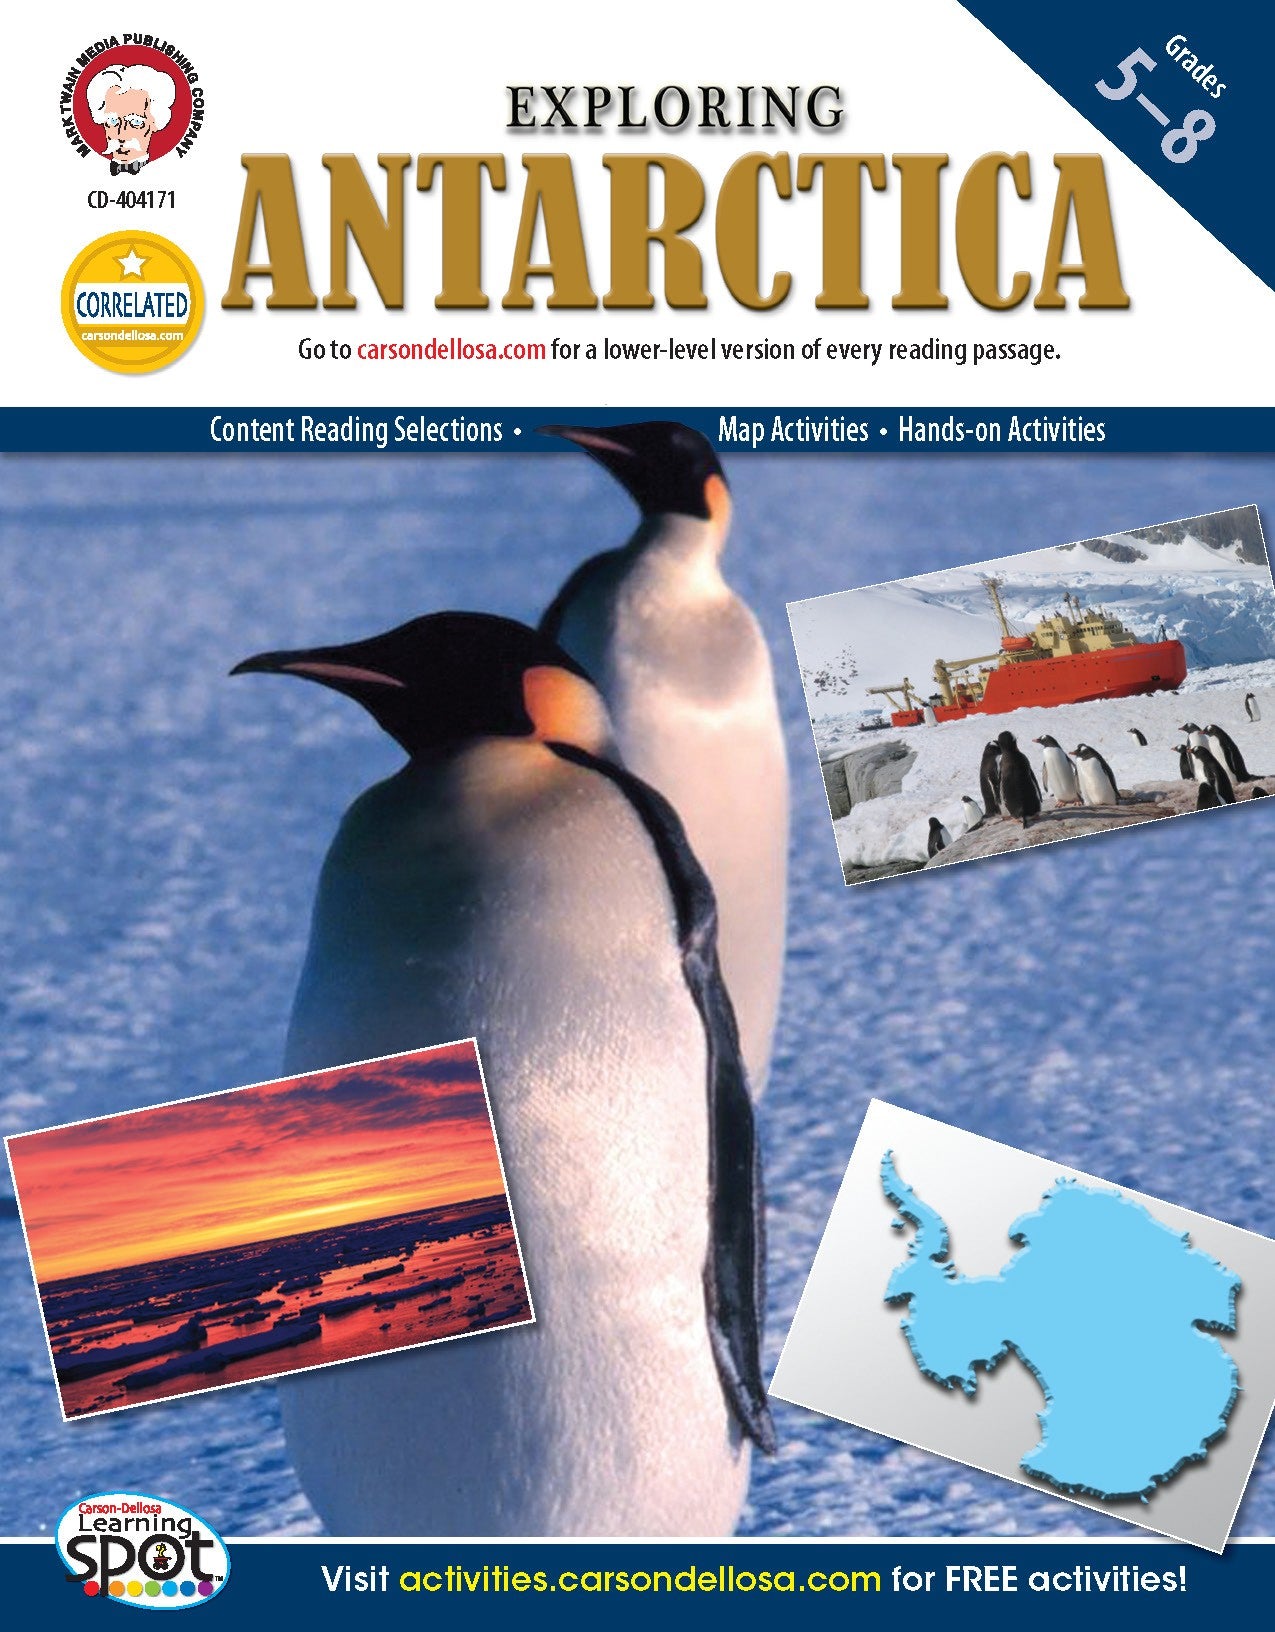 Antarctica exploration, Geography education, Antarctic continent, Classroom resources, Reading selections, Questioning strategies, Critical thinking, Map projects, Hands-on activities, Physical geography, Political geography, Human geography, Interactive learning, Differentiated instruction, Struggling readers, Educational materials, Student engagement, Curriculum enrichment.